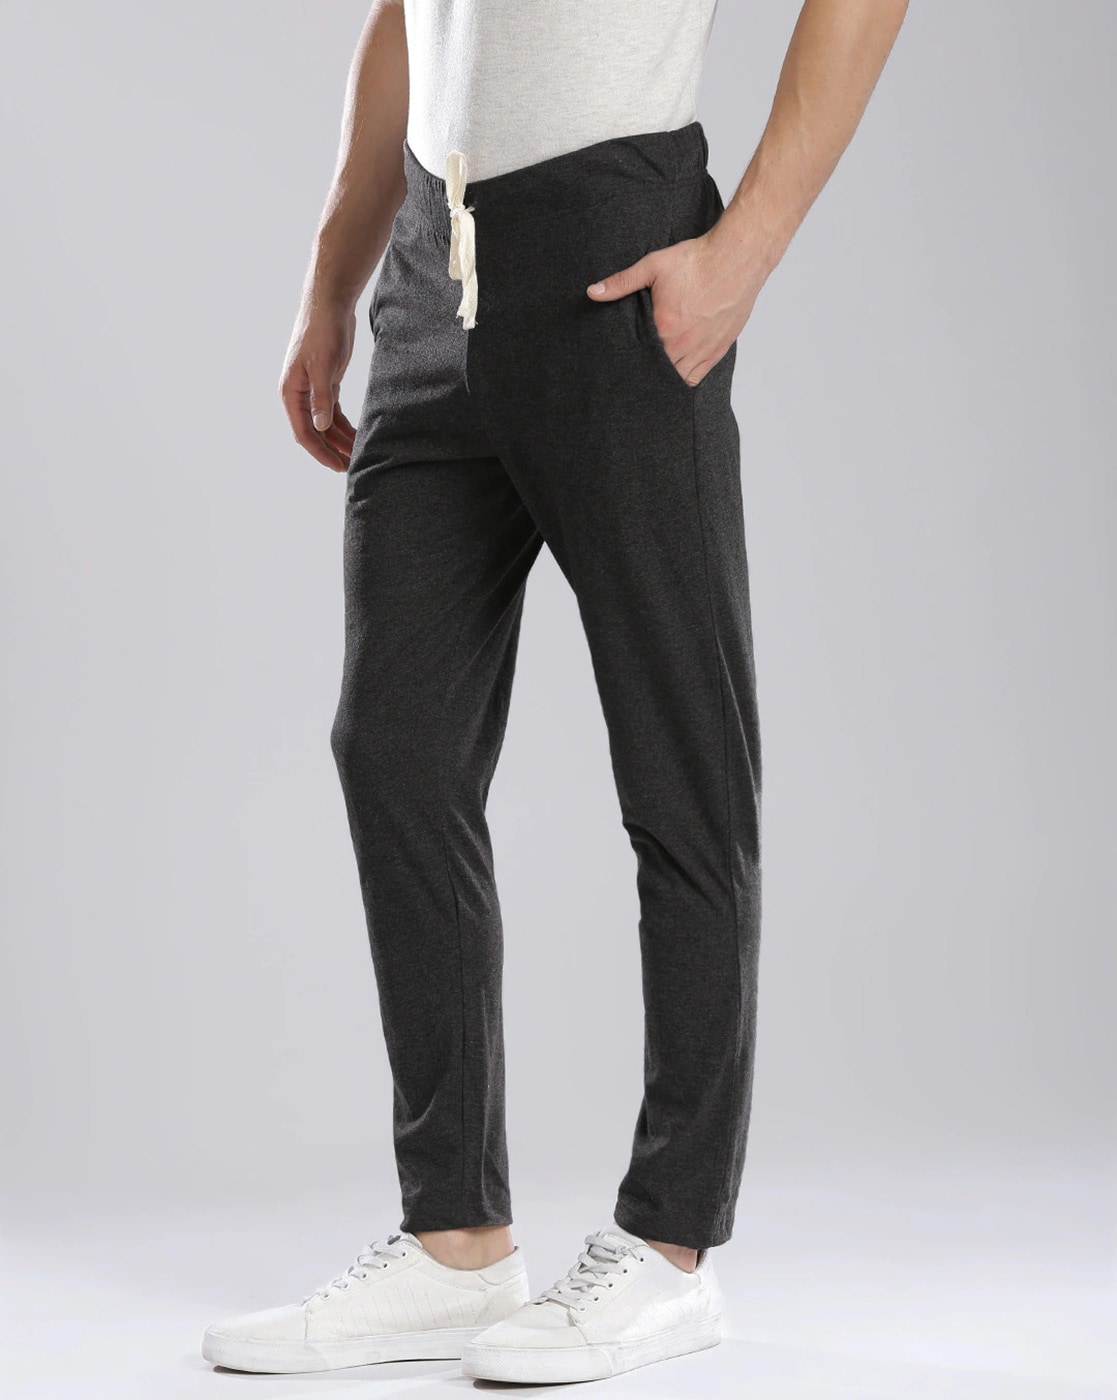 Hubberholme Charcoal Grey Striped Track Pants 3596042.htm - Buy Hubberholme  Charcoal Grey Striped Track Pants 3596042.htm online in India